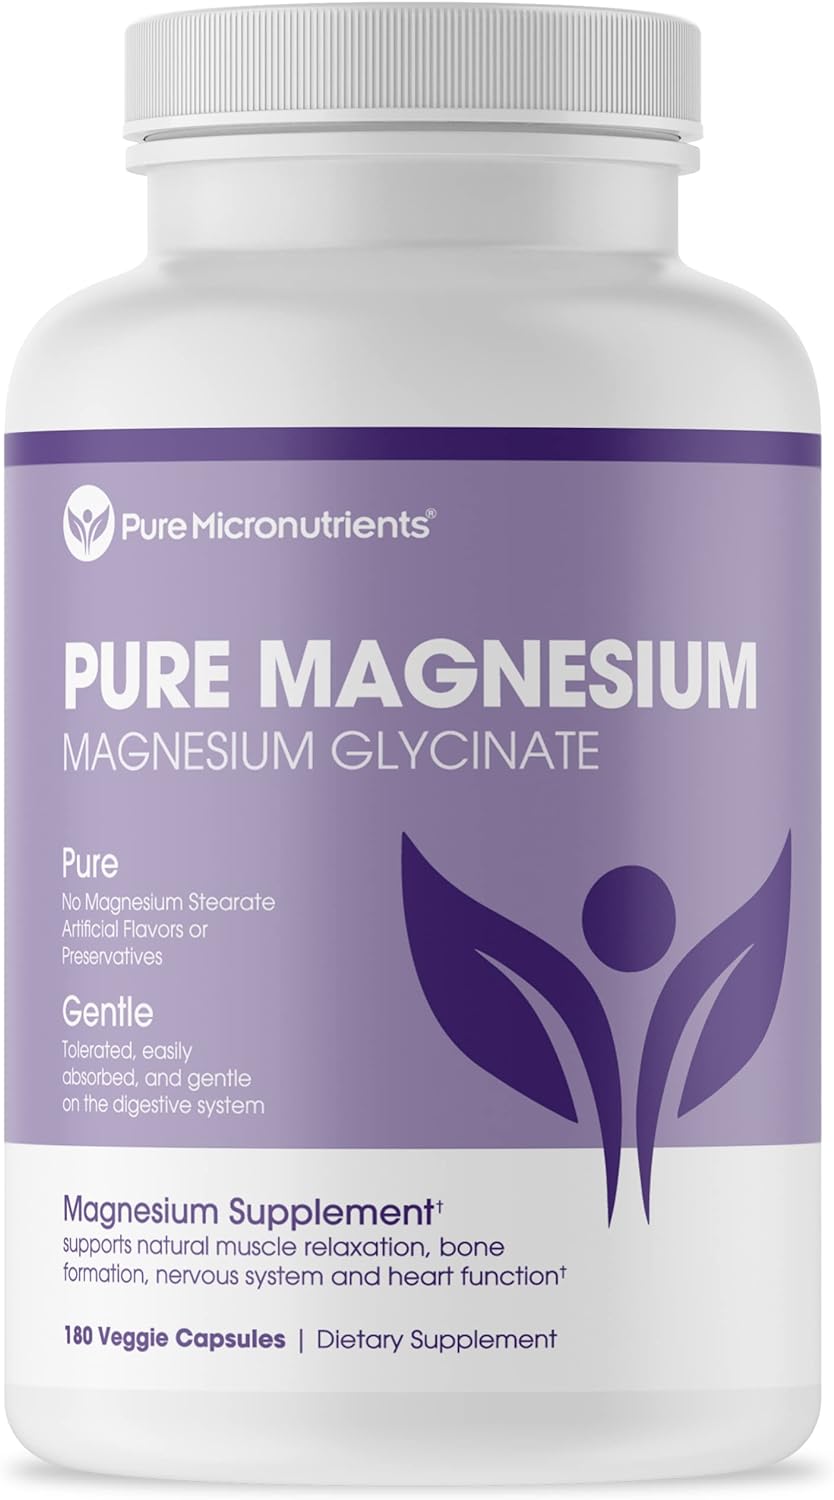 Pure Micronutrients Magnesium Glycinate Supplement (Che